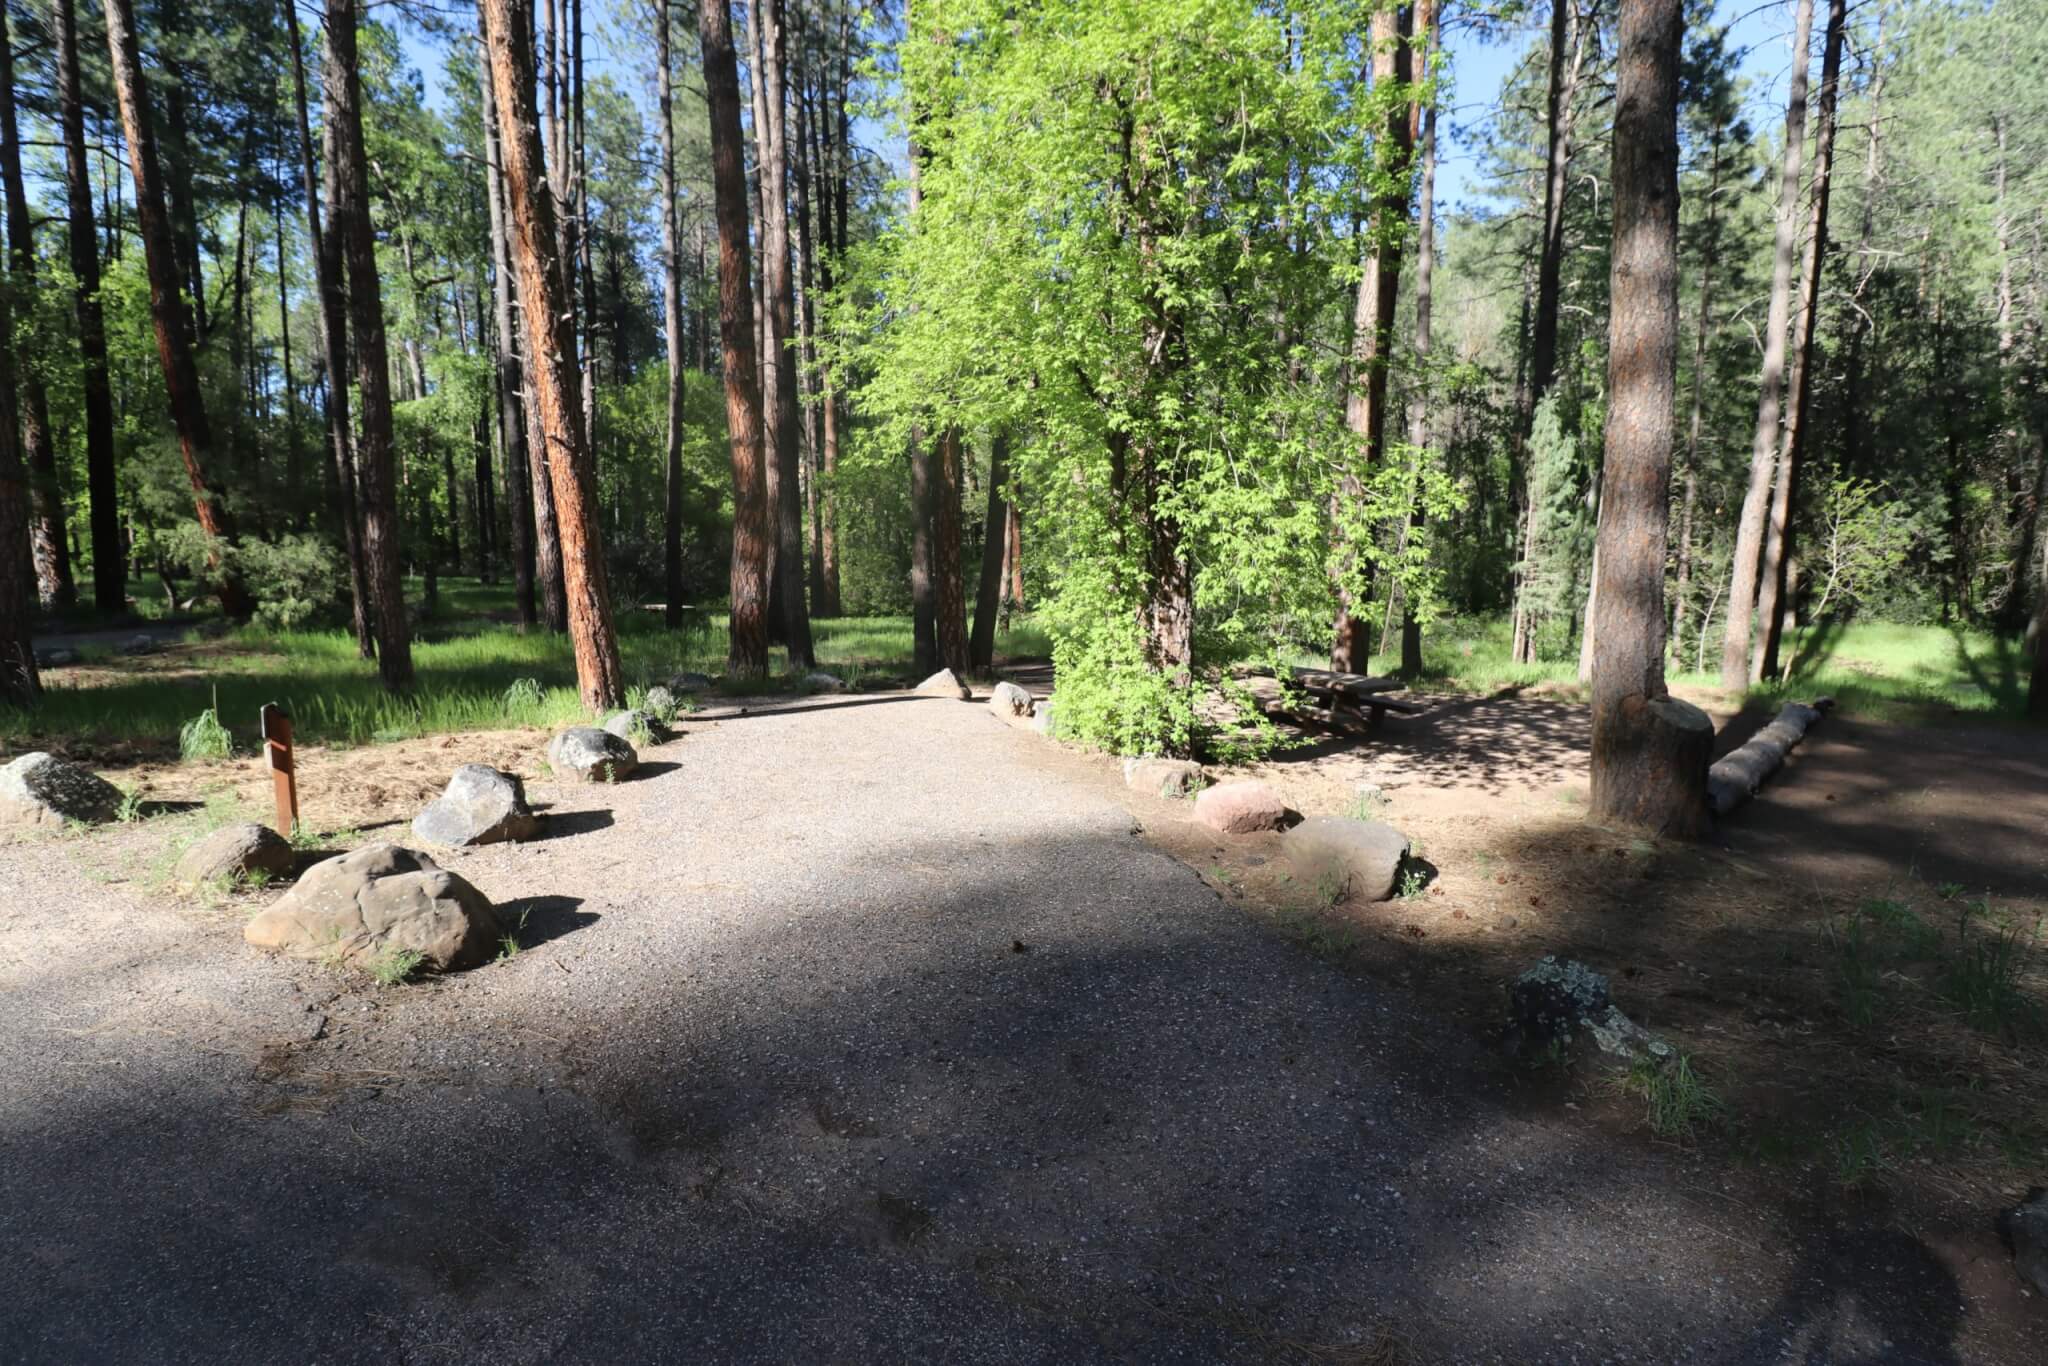 Sedona Area Campgrounds to reopen on May 20, 2020 - Cave Springs A5